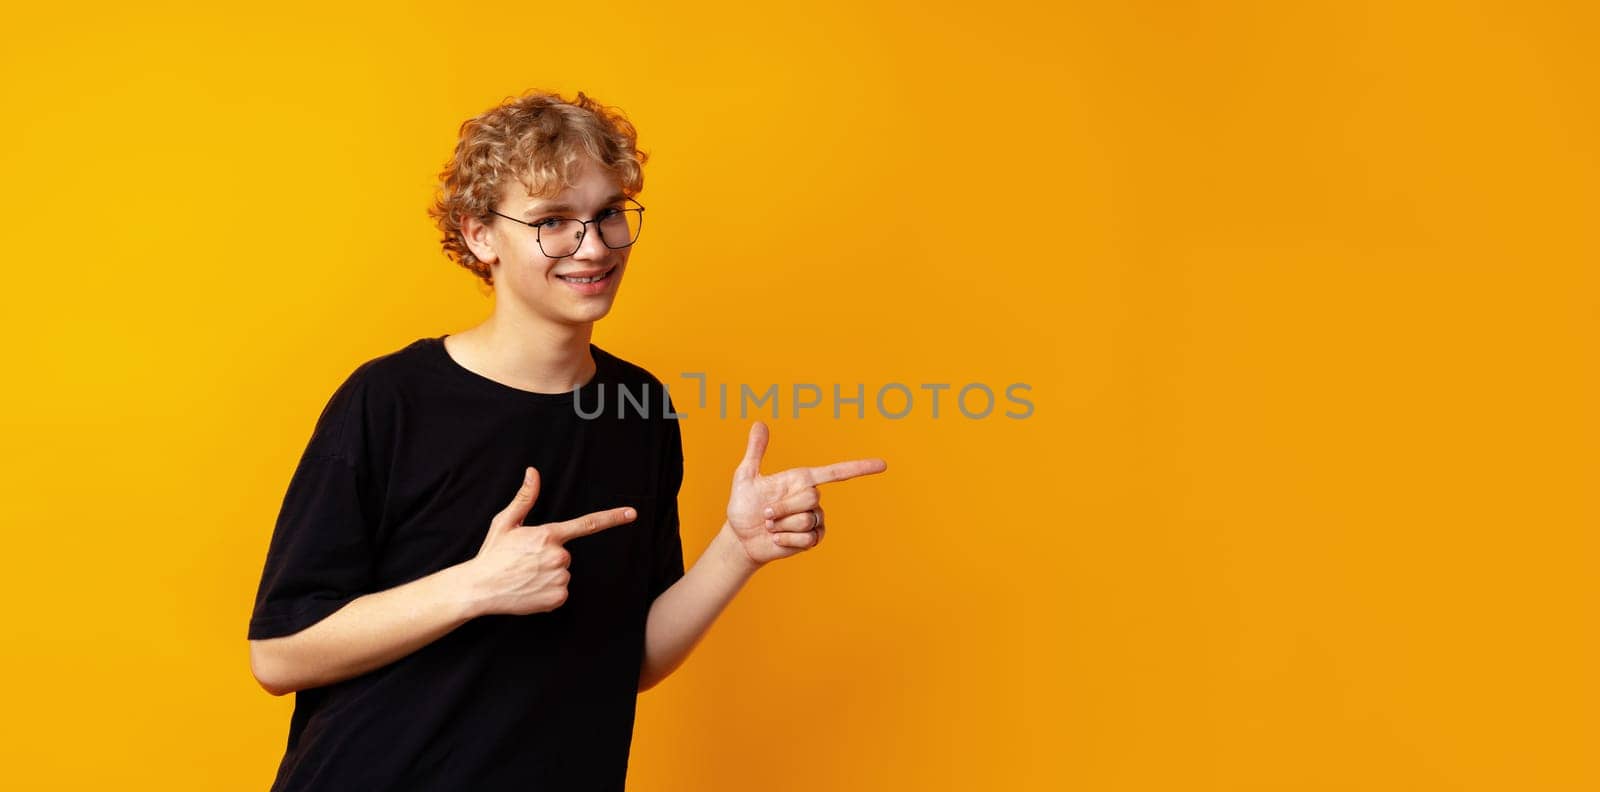 Handsome young man pointing finger to copy space on yellow banner background close up